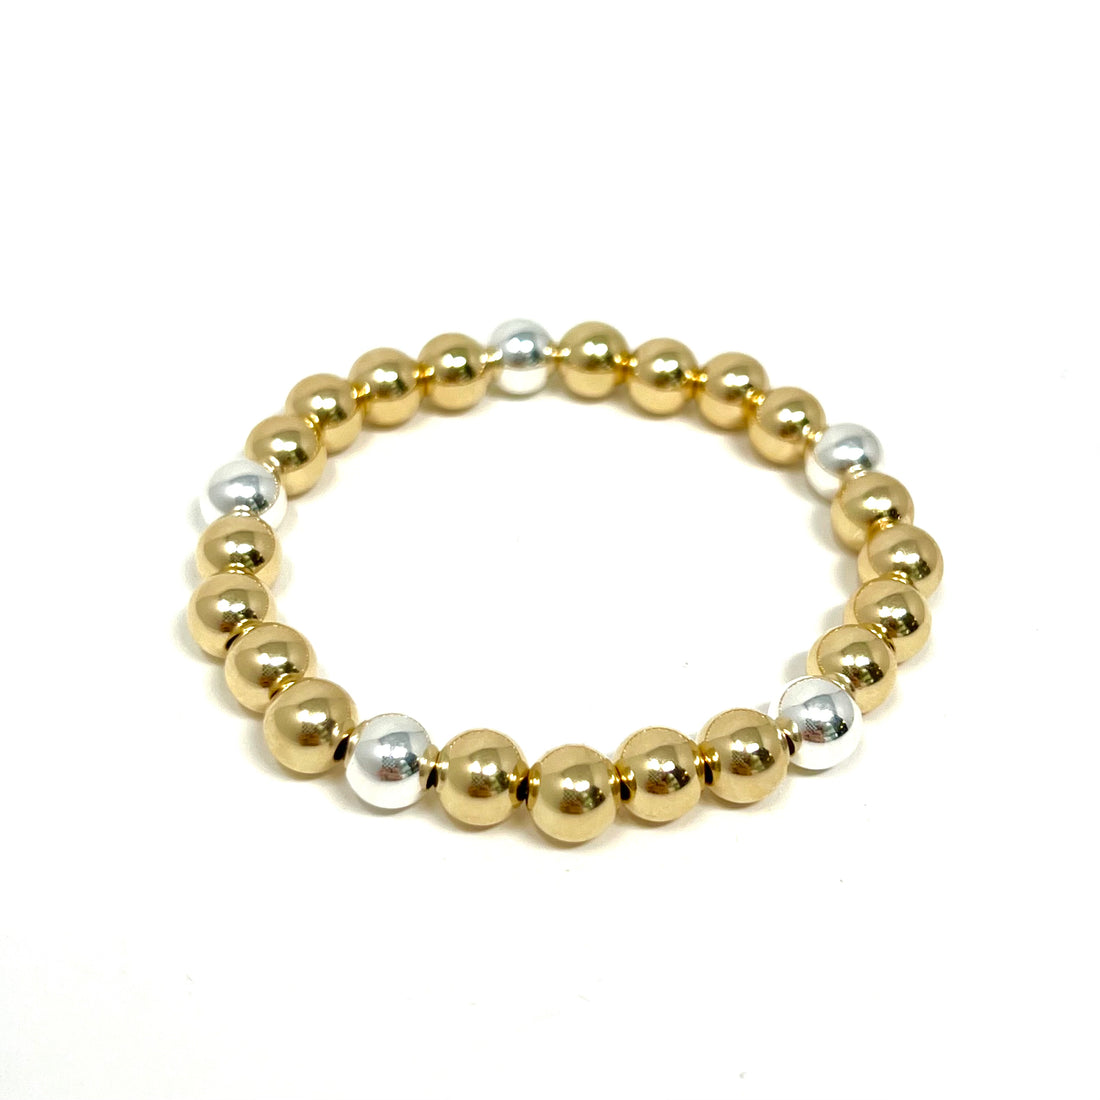 Large Ball Bracelet in Gold with Silver Dots